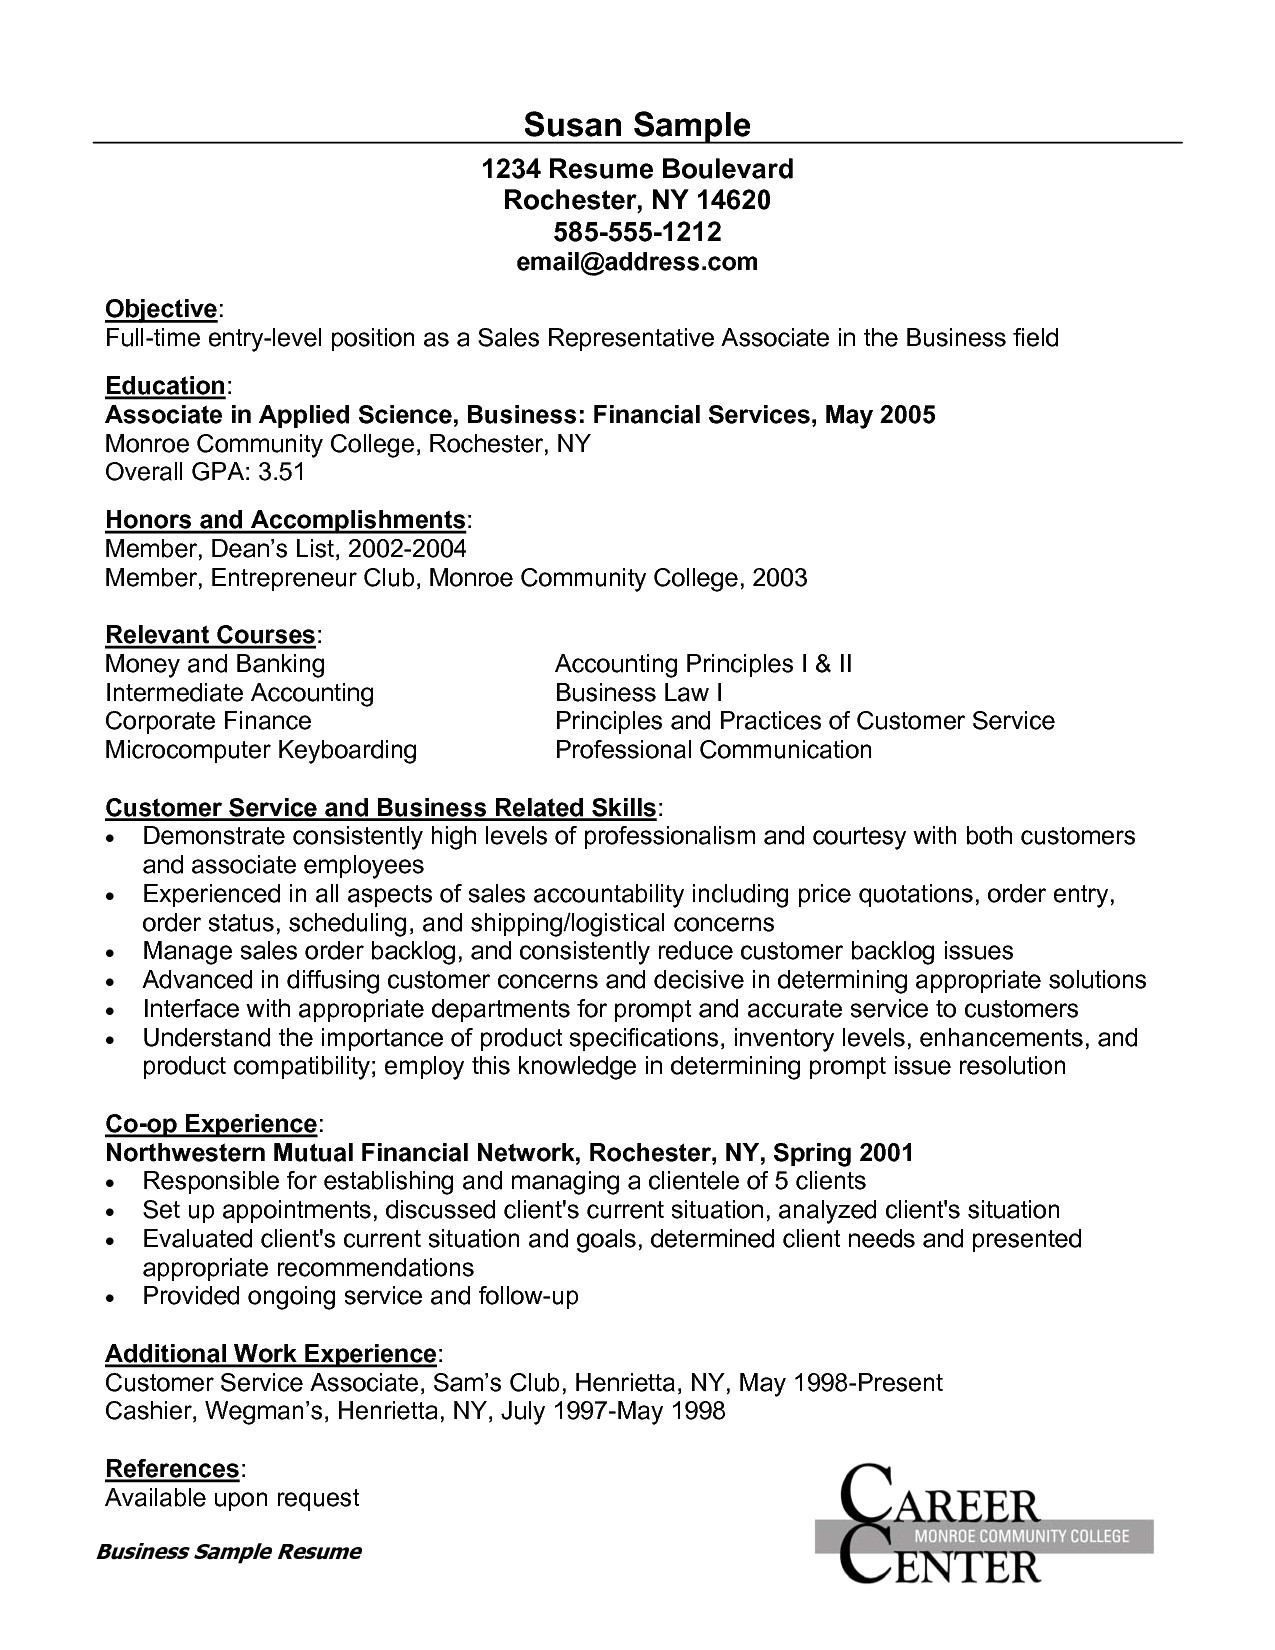 sample resume for call center agent applicant